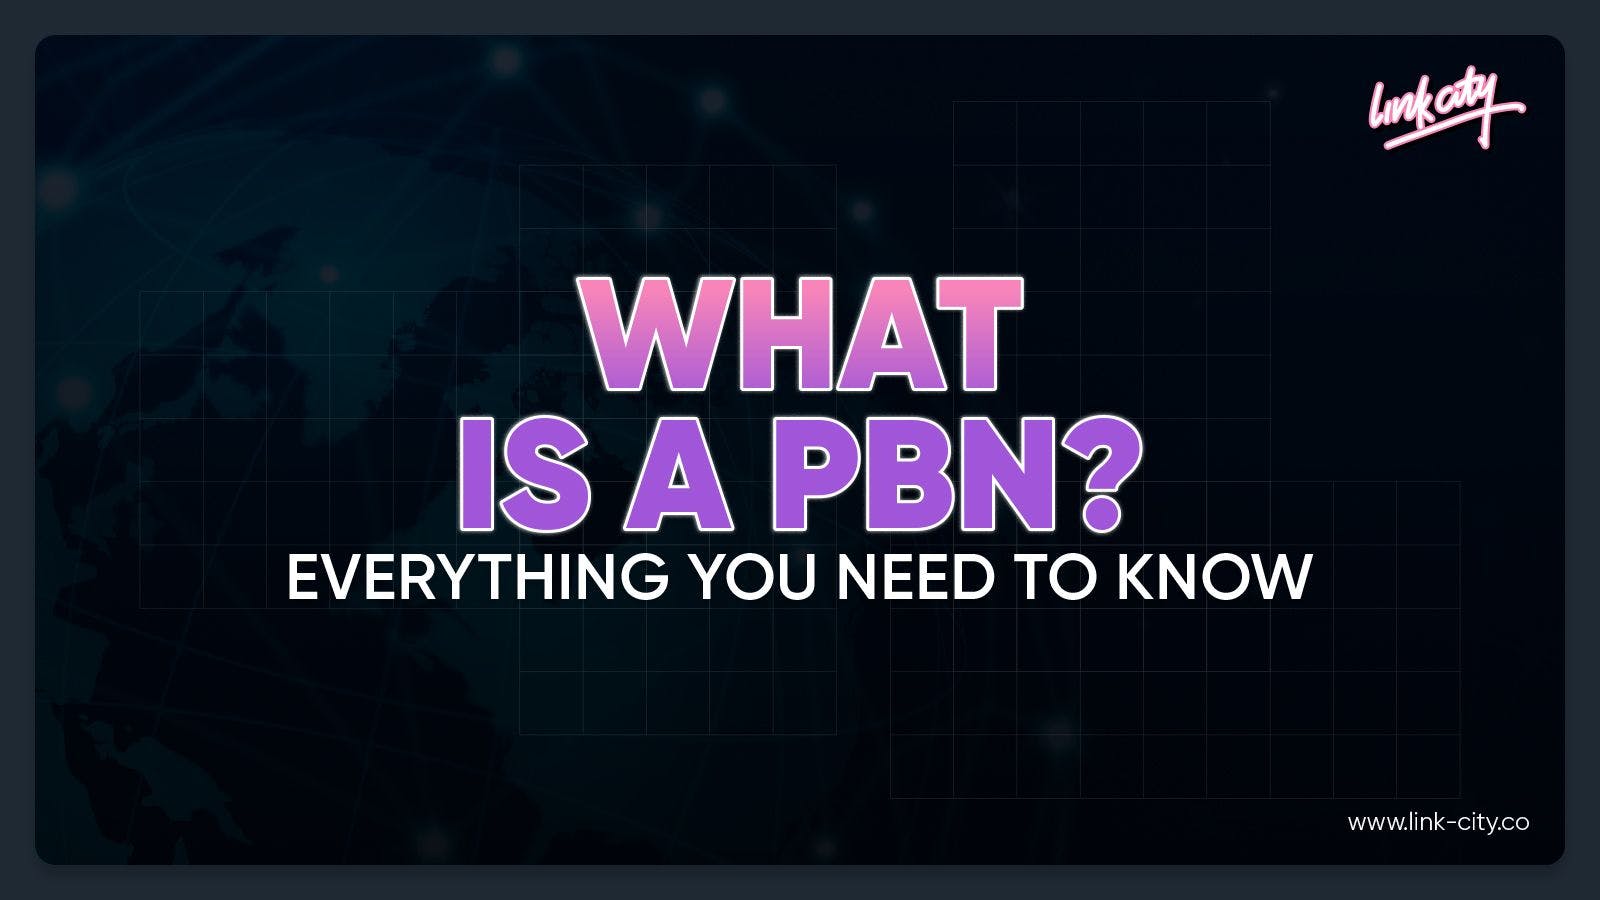 What is a PBN? Everything You Need To Know